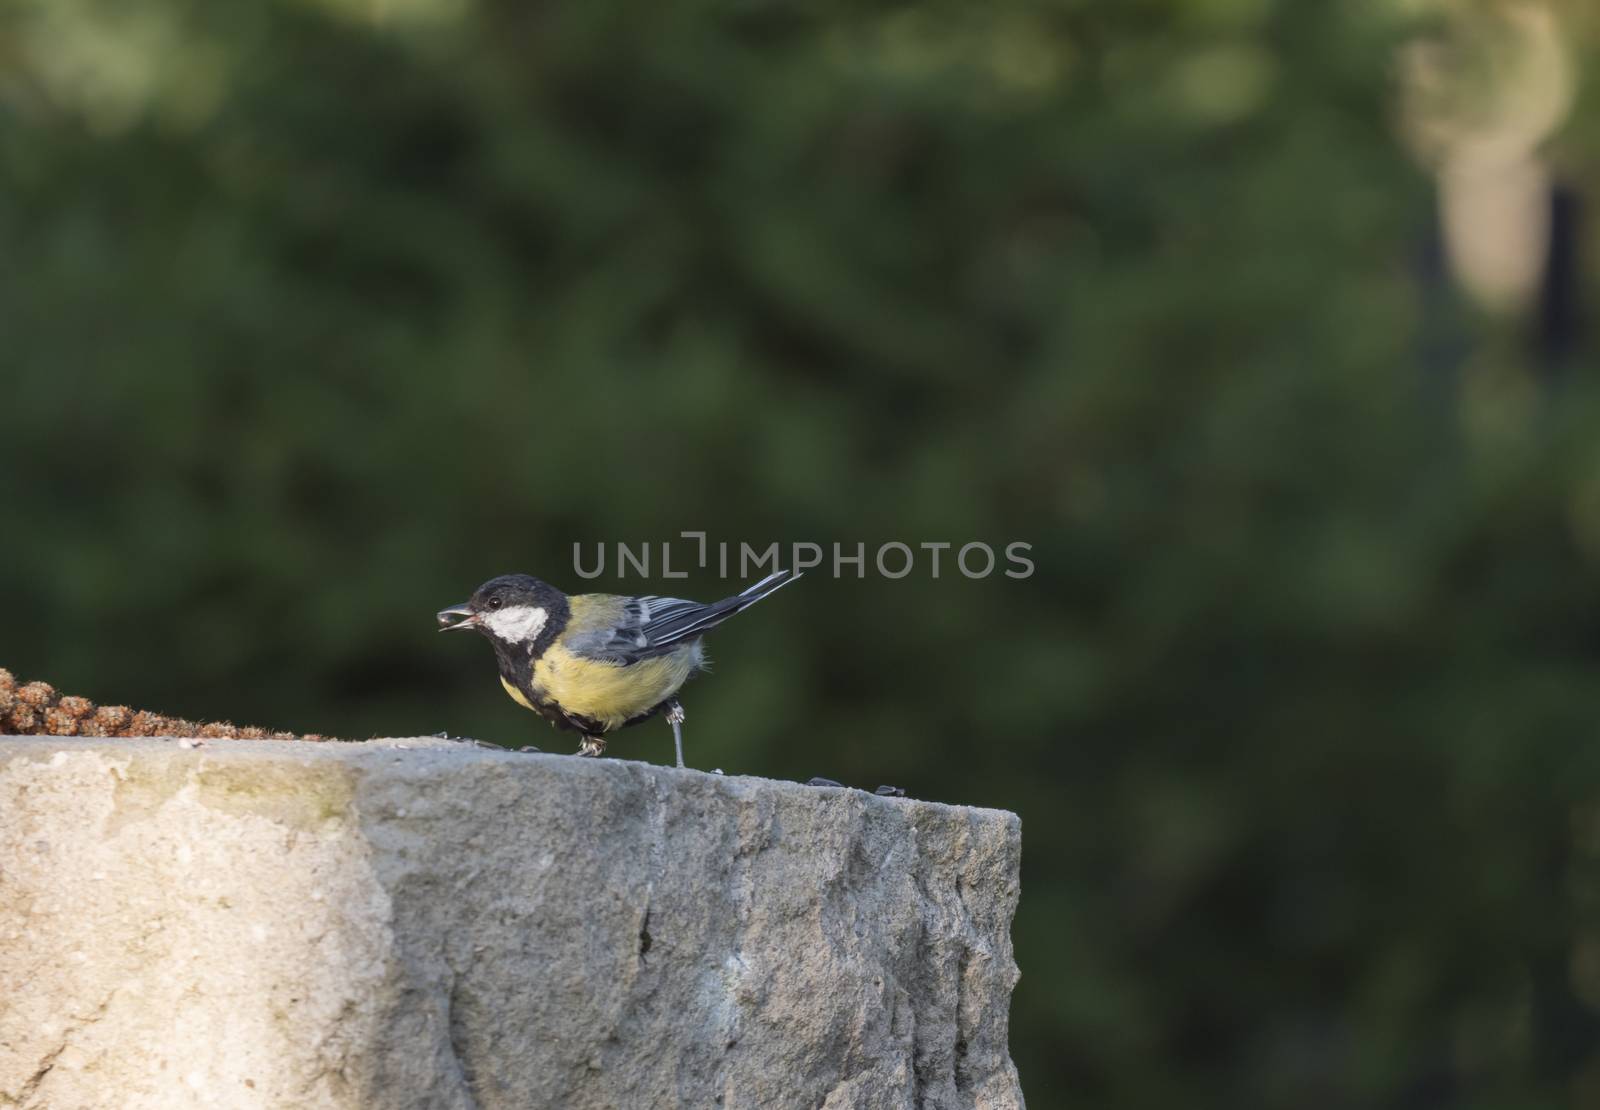 Close up male Great tit Parus major sits on the sandstone wall eating and feeding wth sunflower seed in bill. Great tit is a passerine bird in the tit family Paridae. Dark green bokeh background.